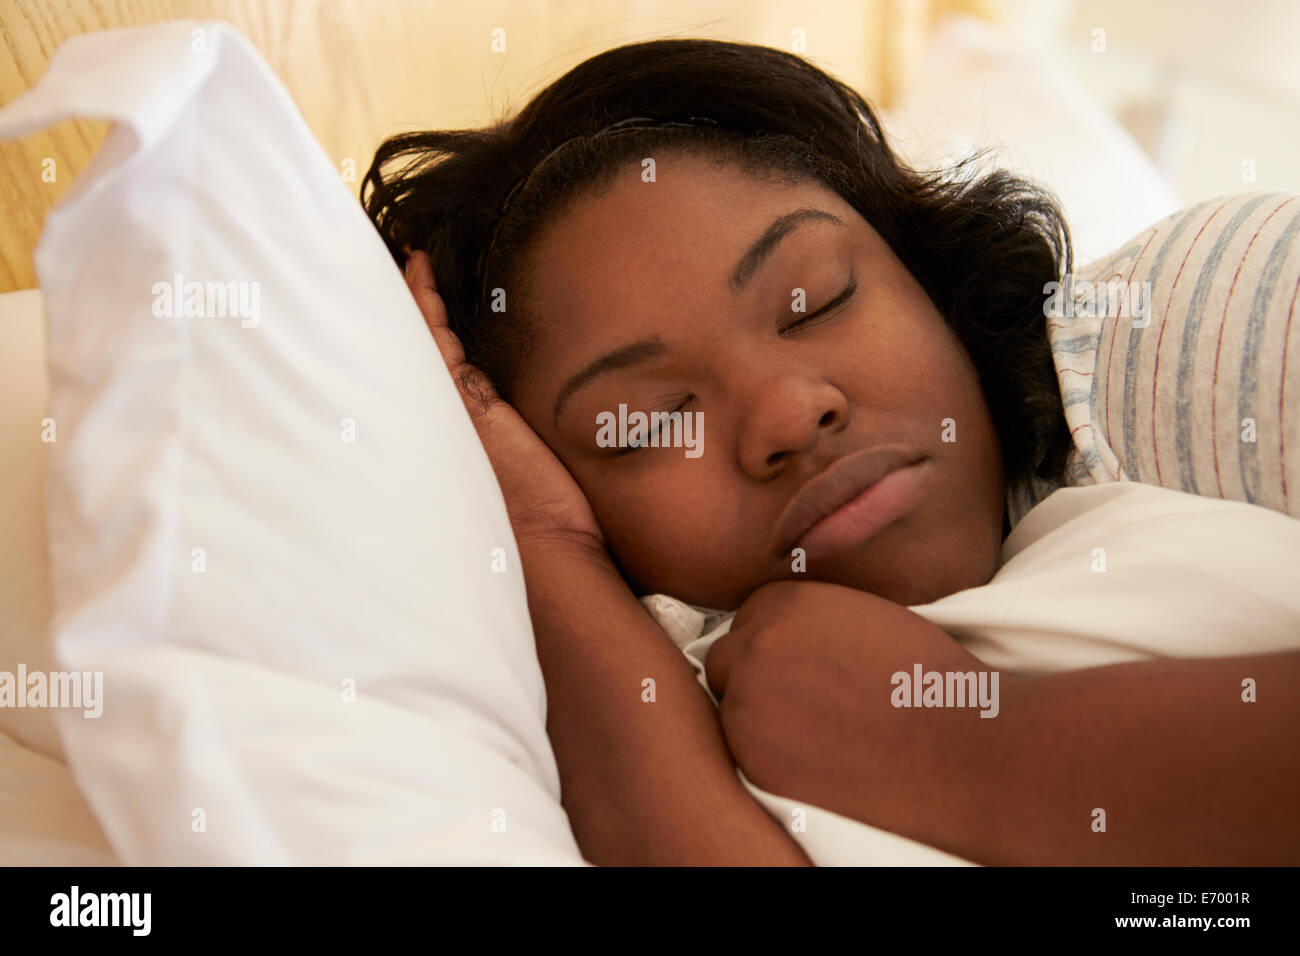 Overweight Woman Asleep In Bed Stock Photo